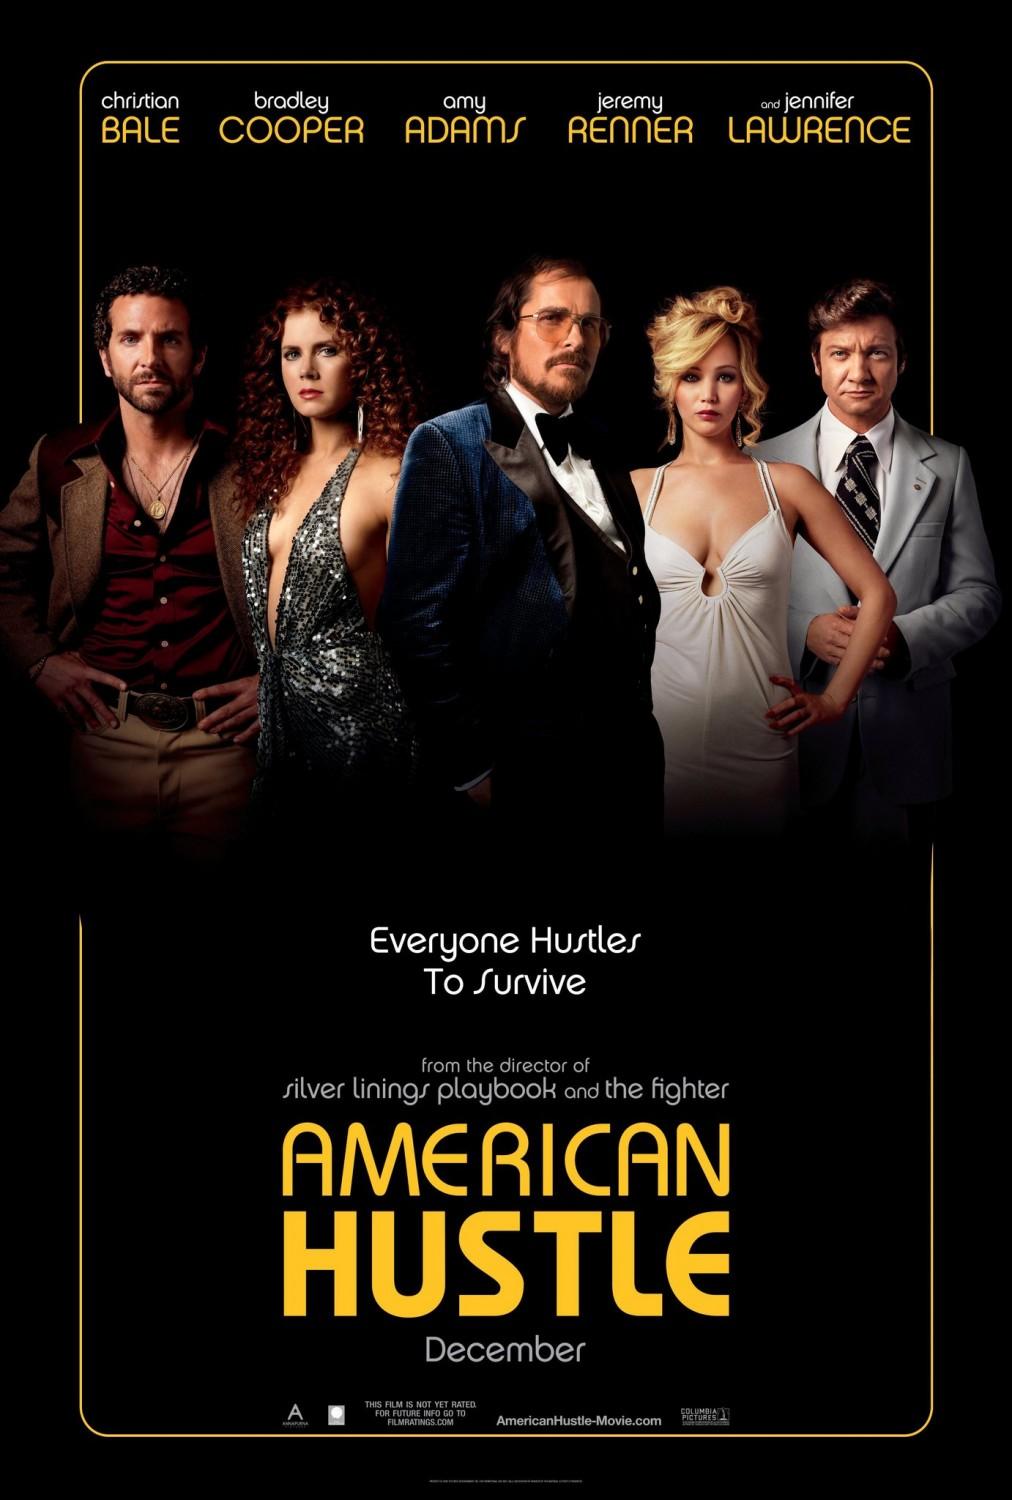 ‘American Hustle’ is David O. Russell’s latest reinvented homage